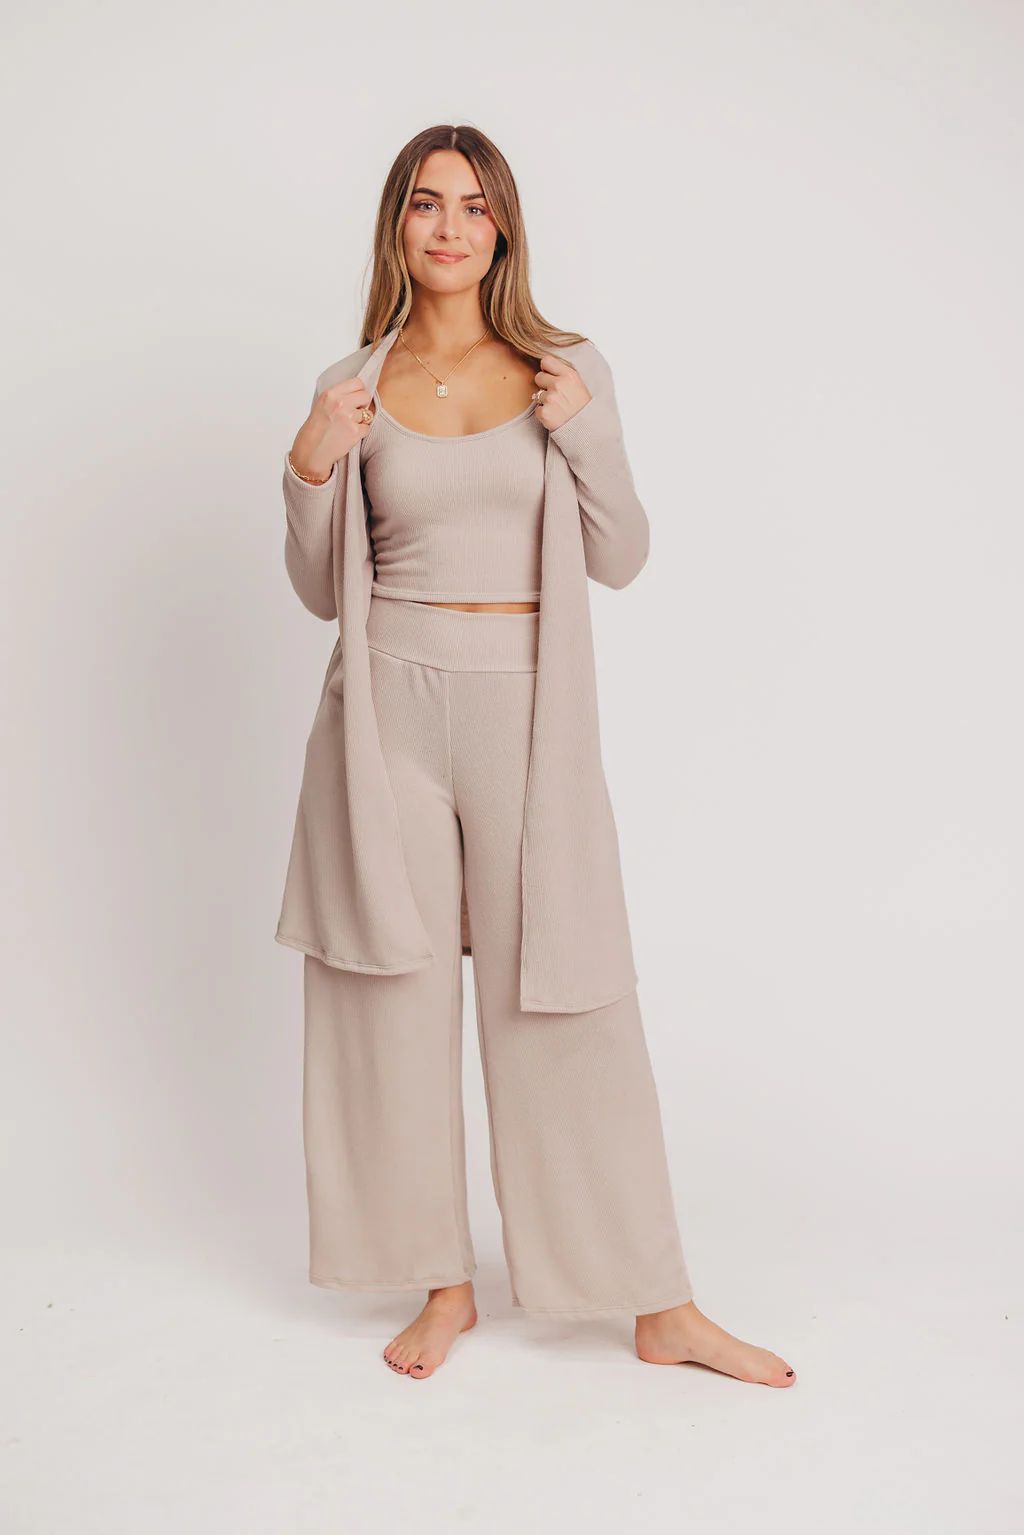 Betsy Ribbed Cardigan in Khaki - Inclusive Sizing (S-2X) | Worth Collective